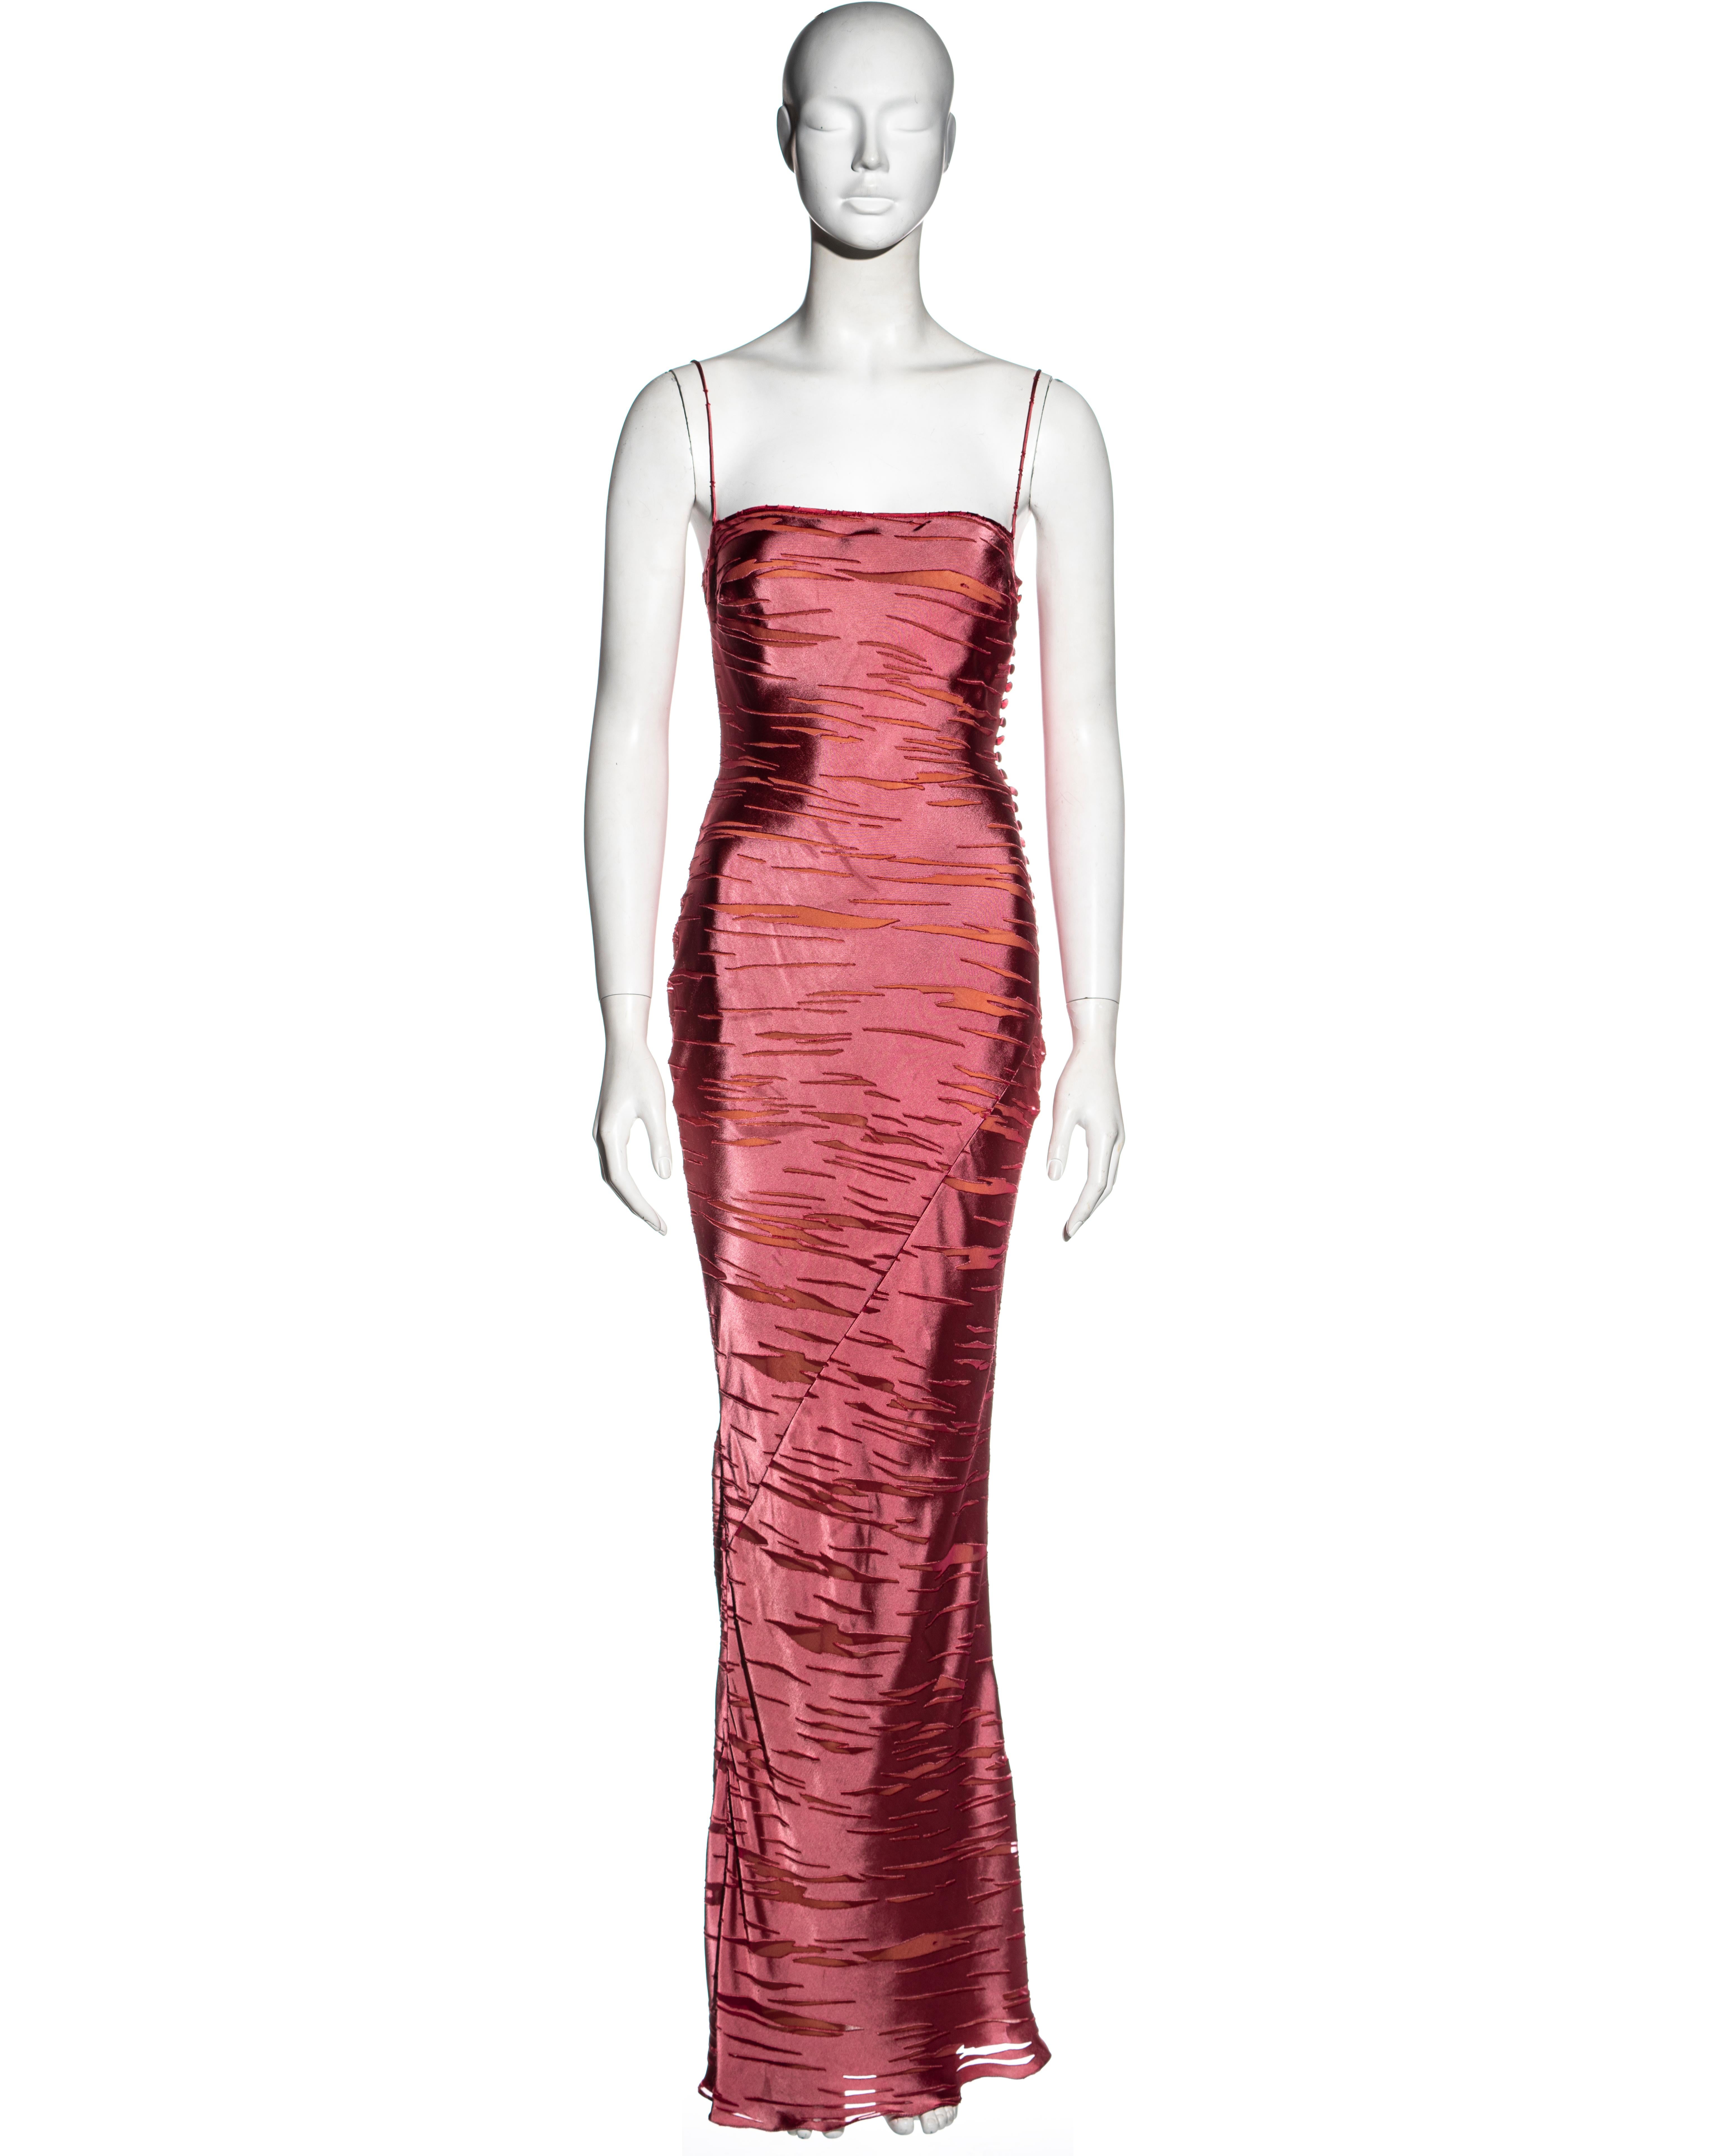 ▪ Christian Dior crimson red silk evening dress
▪ Designed by John Galliano 
▪ Torn effect 
▪ Multiple fabric buttons at the side seam 
▪ Spaghetti straps 
▪ Straight across neckline 
▪ Bias cut skirt 
▪ Nude silk lining 
▪ FR 38 - UK 10 - US 6
▪